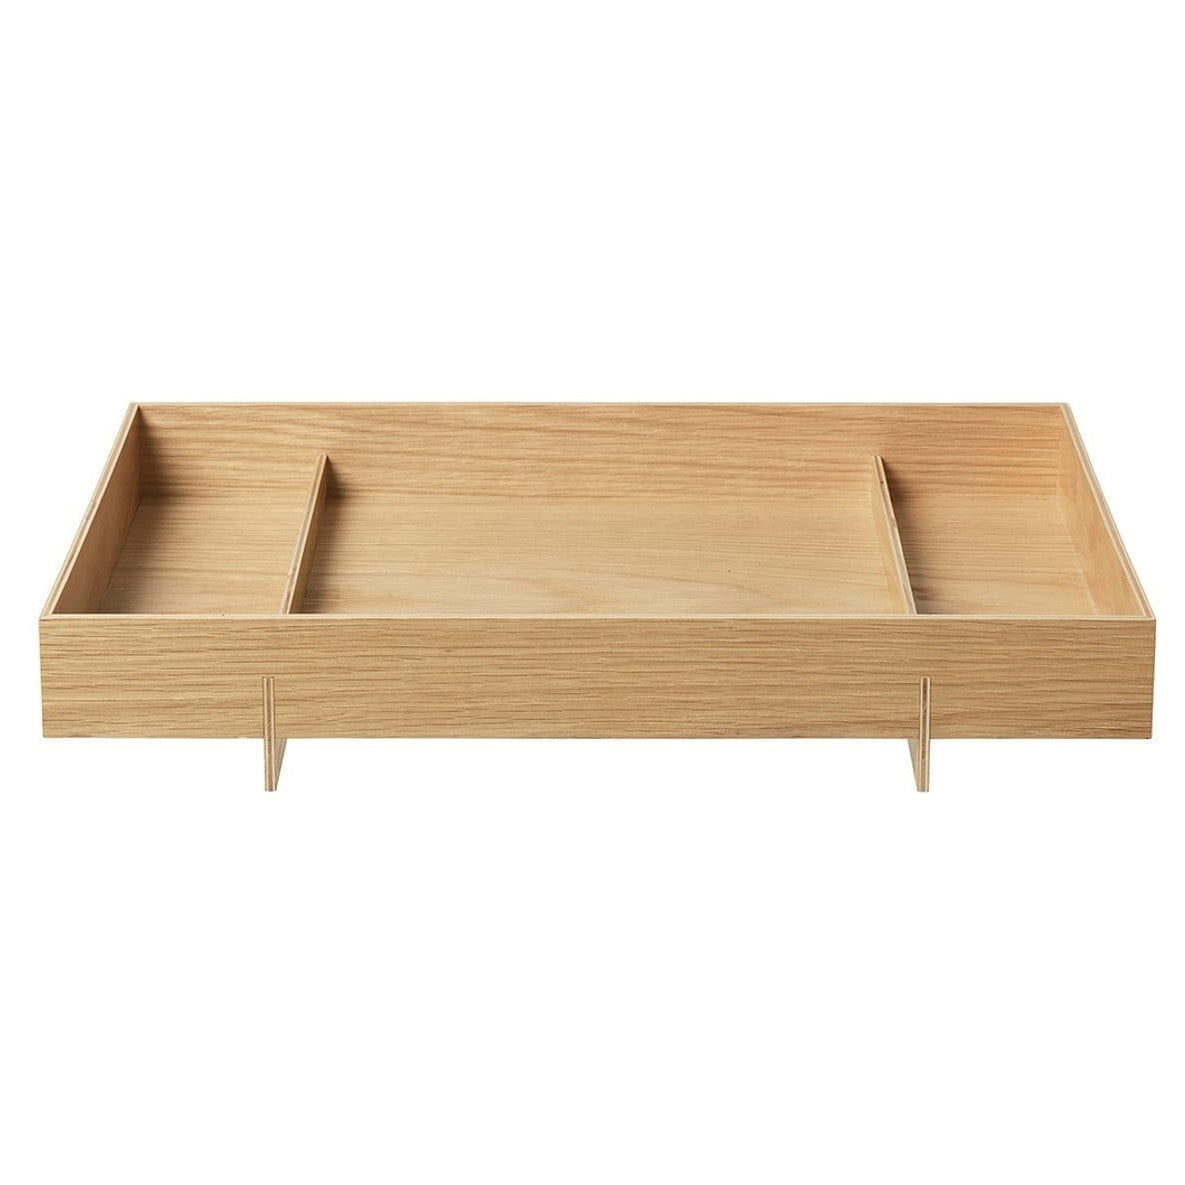 blomus-sectioned-tray-in-light-wood:-decorative-&-functional-abento-large